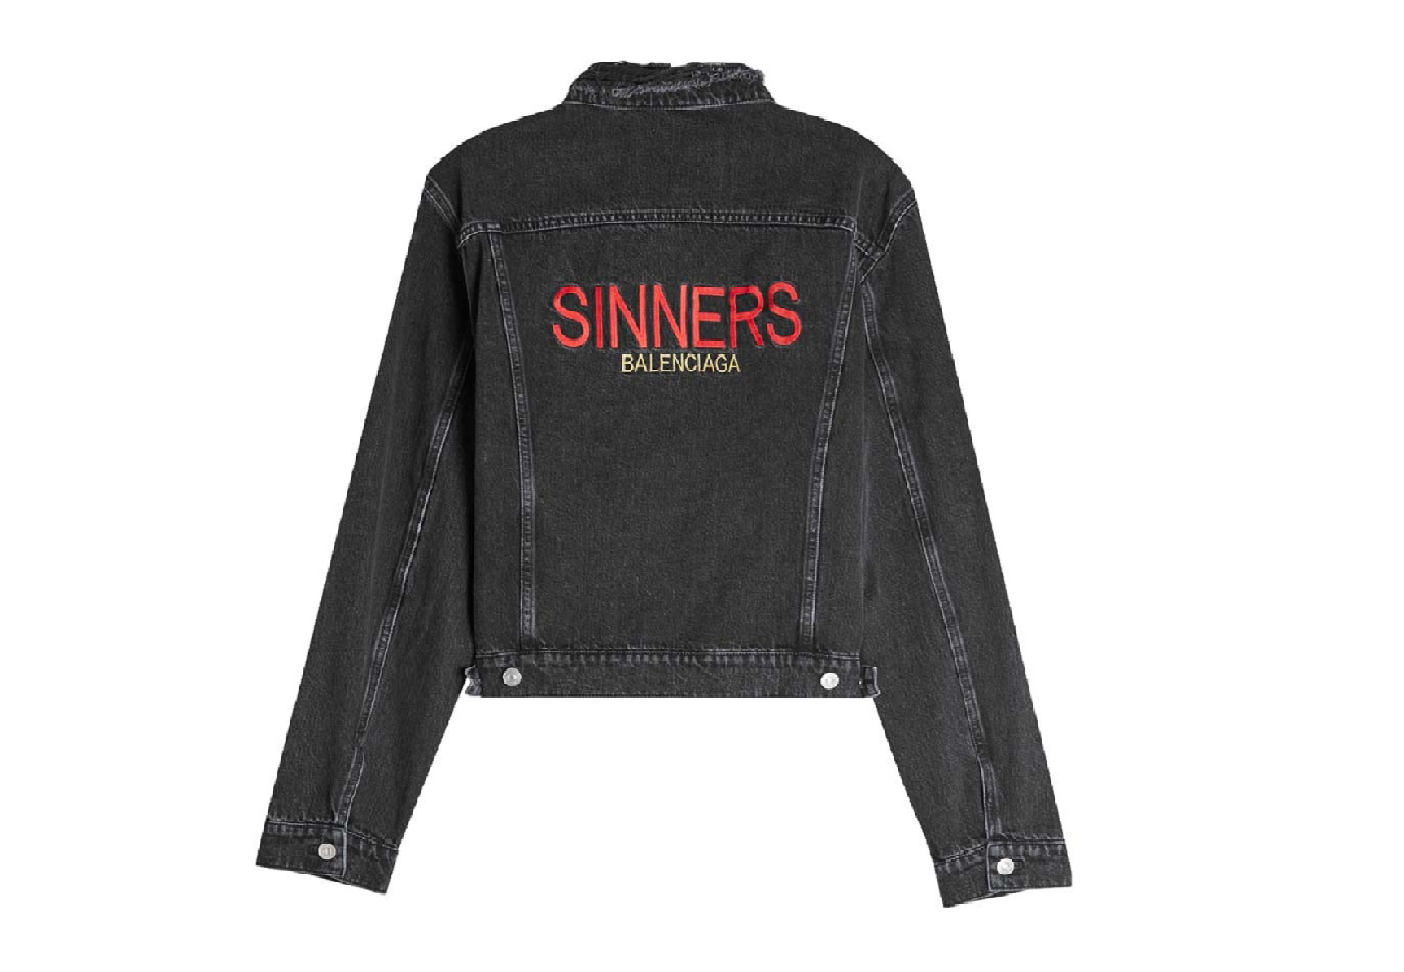 snyde Eastern acceleration Balenciaga presents the new “SINNERS” capsule collection